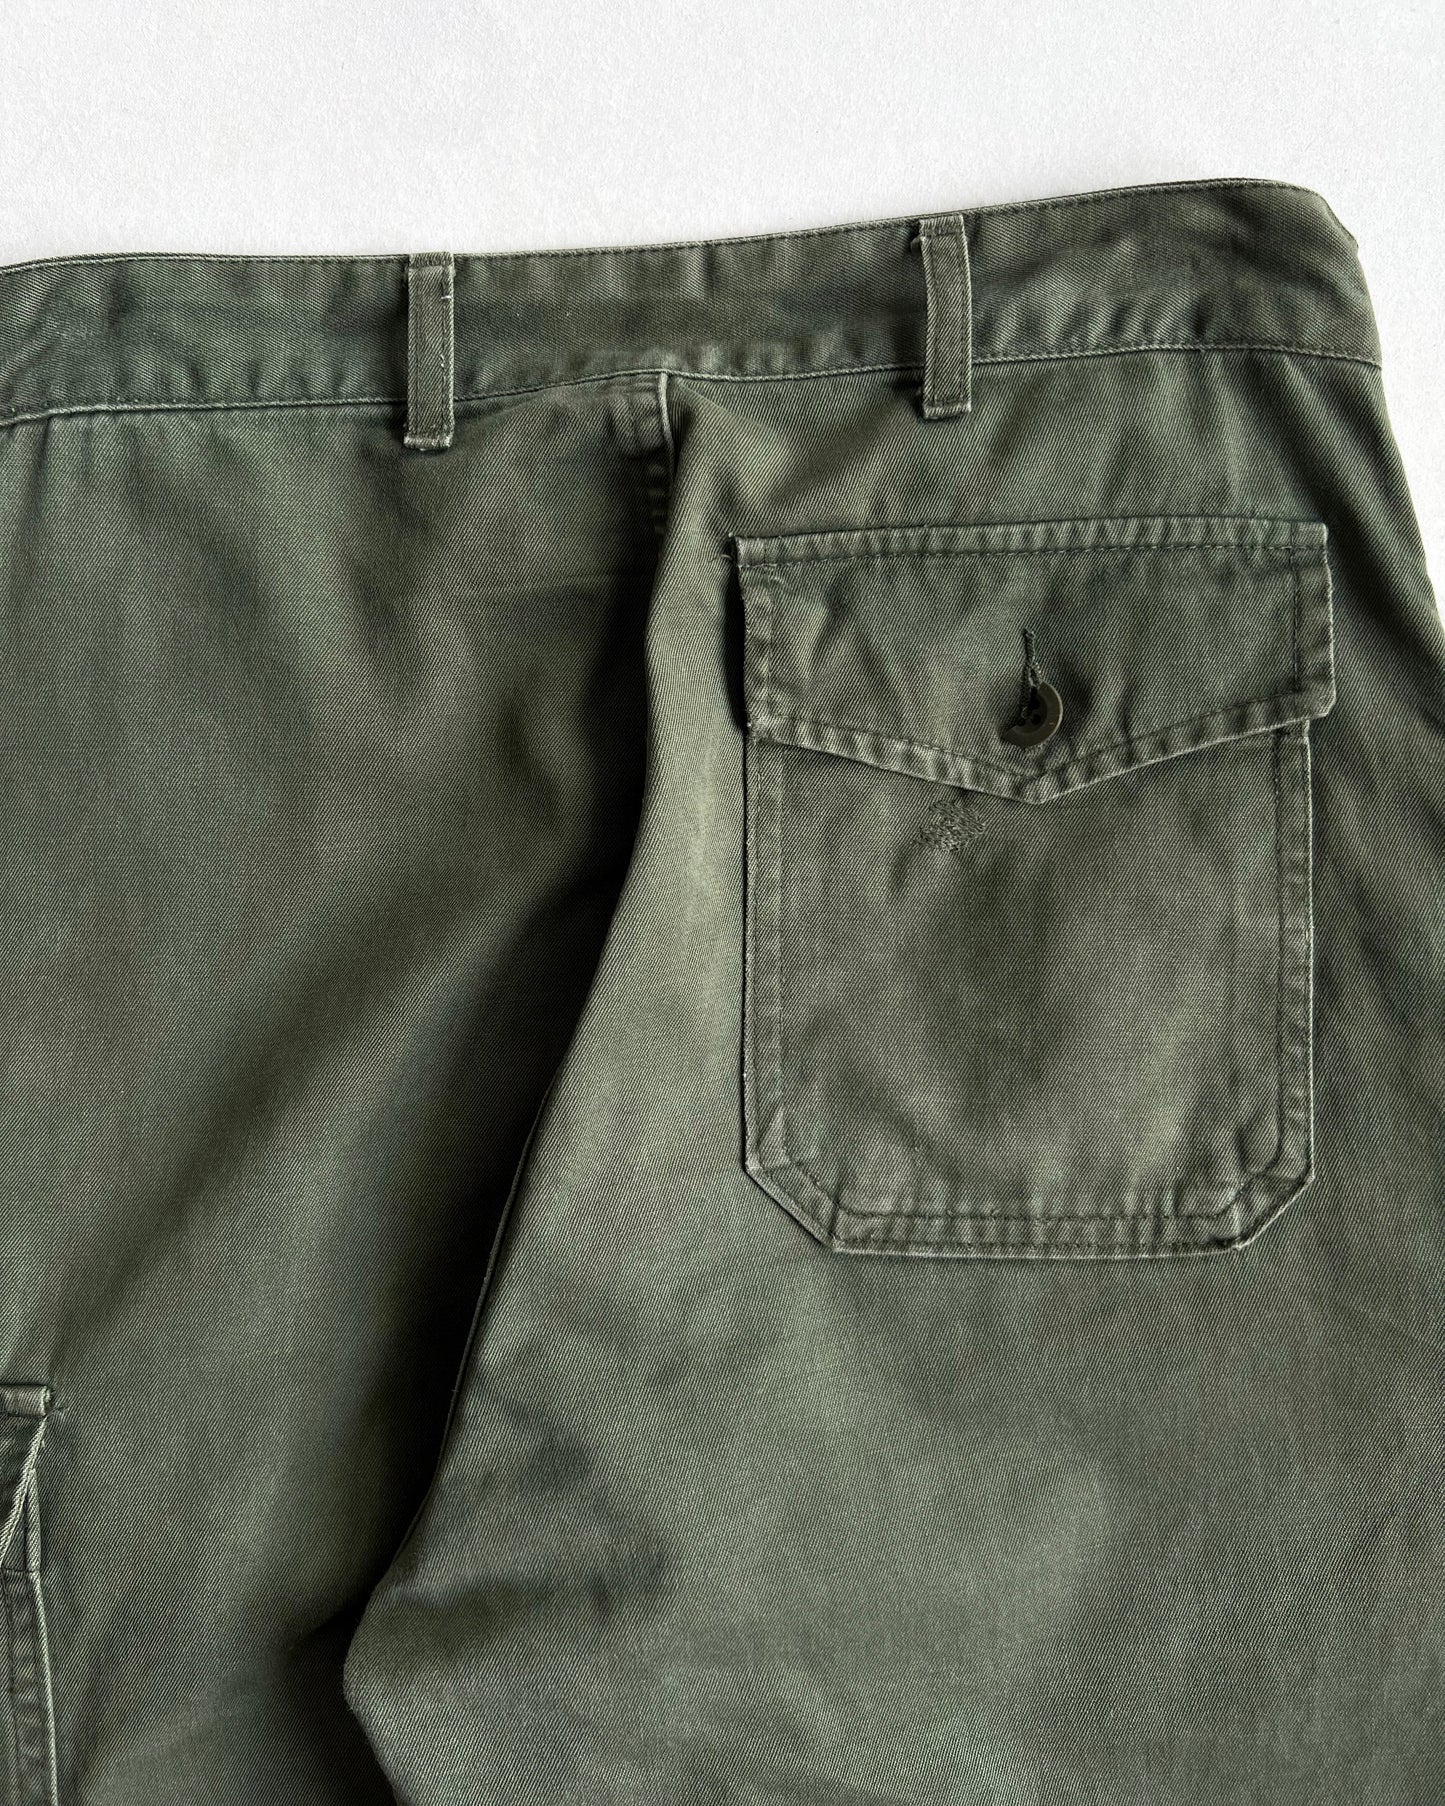 1980S FRENCH ARMY SINGLE POCKET HBT TROUSERS (29)